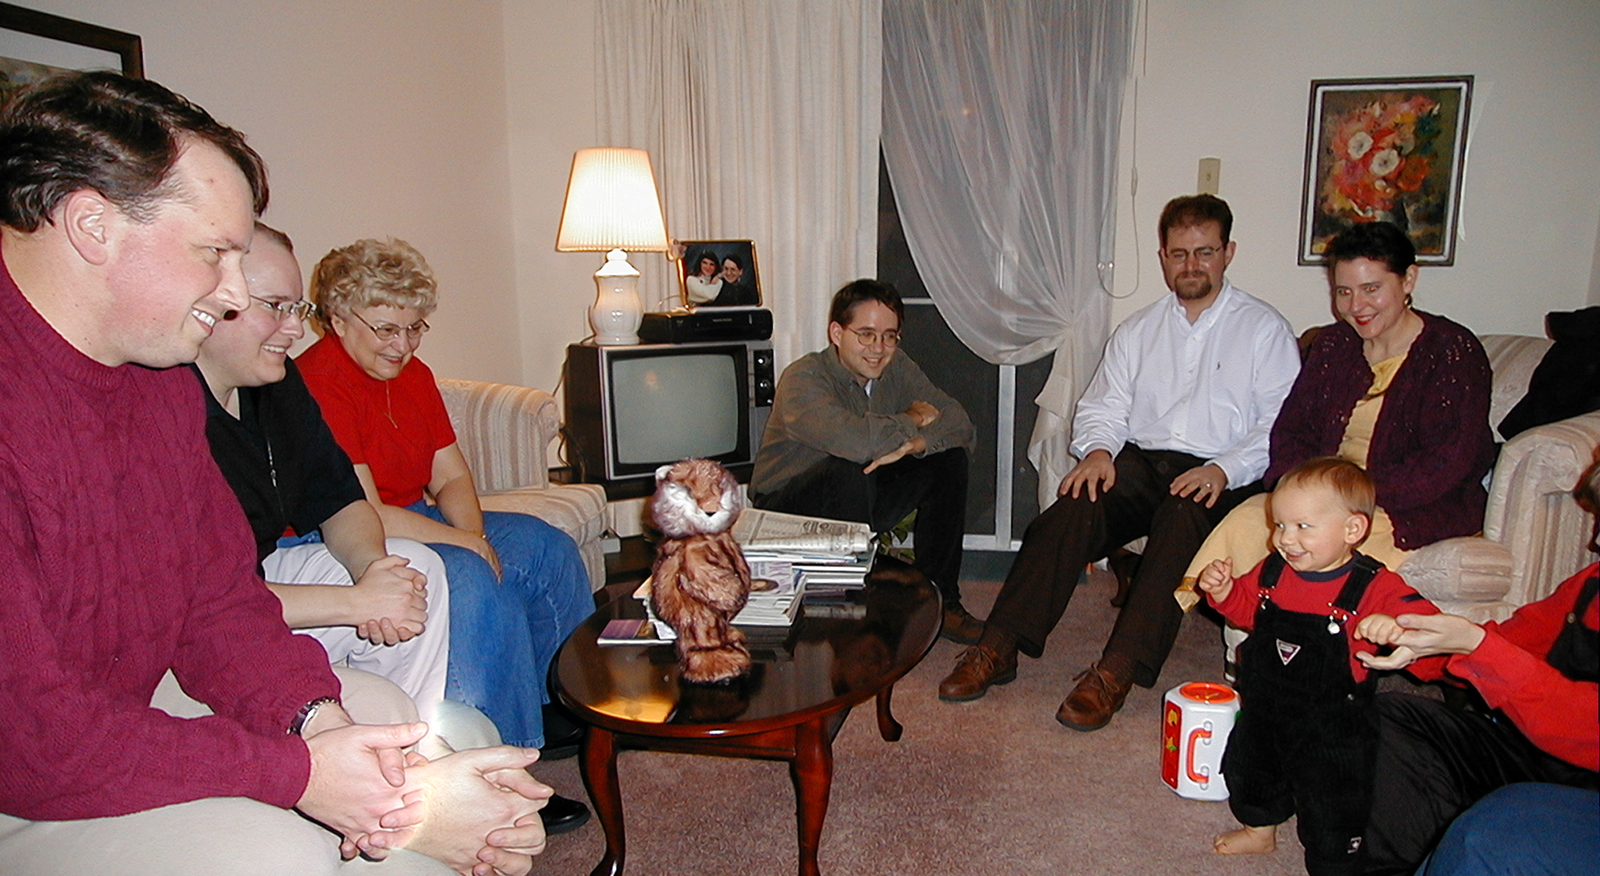 Paul, Marc, Mom, Aunt Dory, Robert, Jackie and Steve admiring baby Miles in Aunt Dory's apartment on Christmas evening